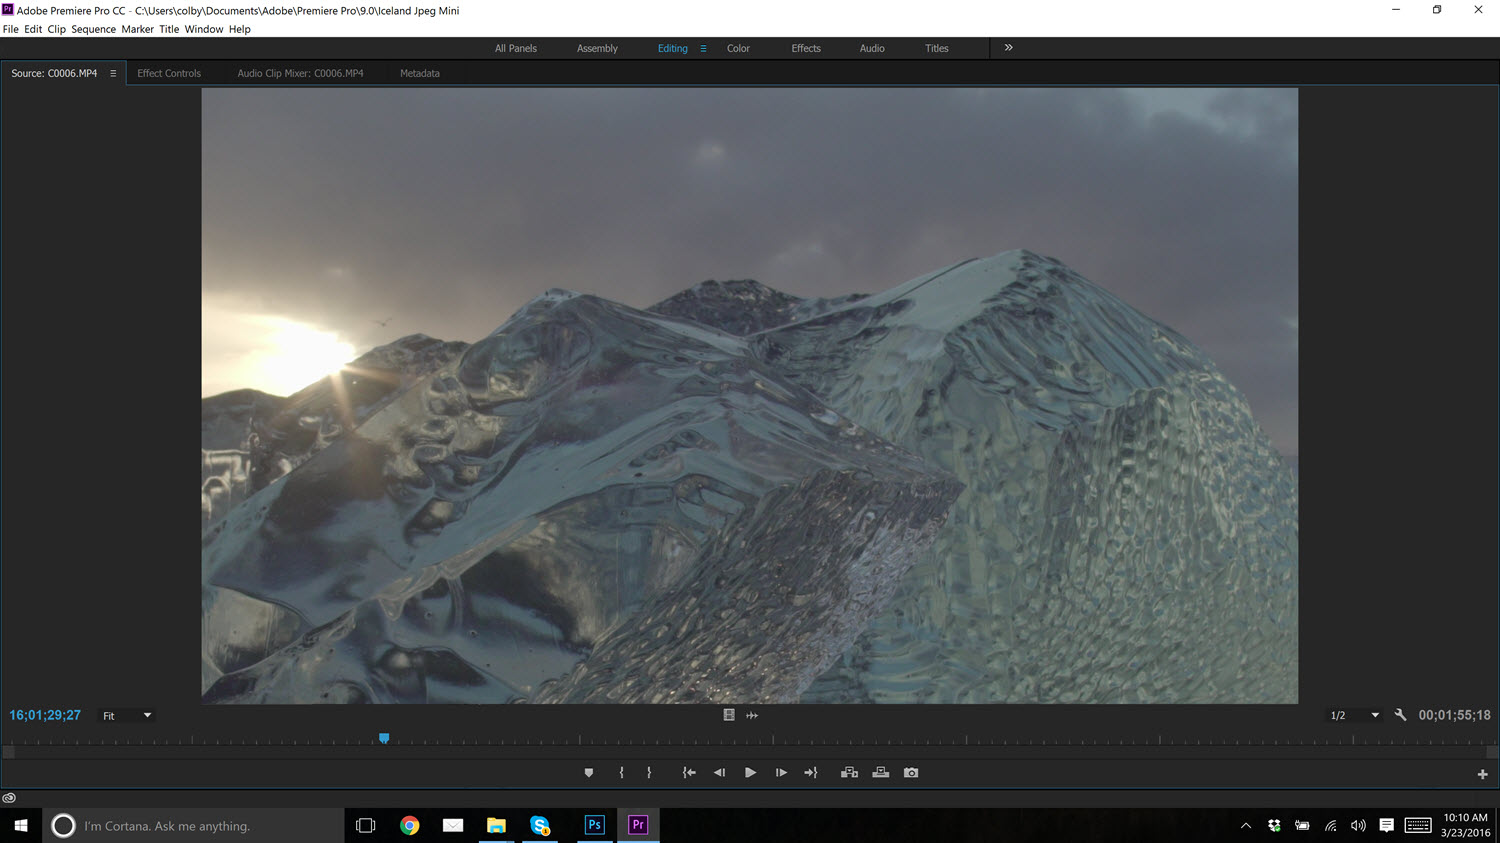 Screenshot of Adobe Premier Pro running on the Dell XPS 15